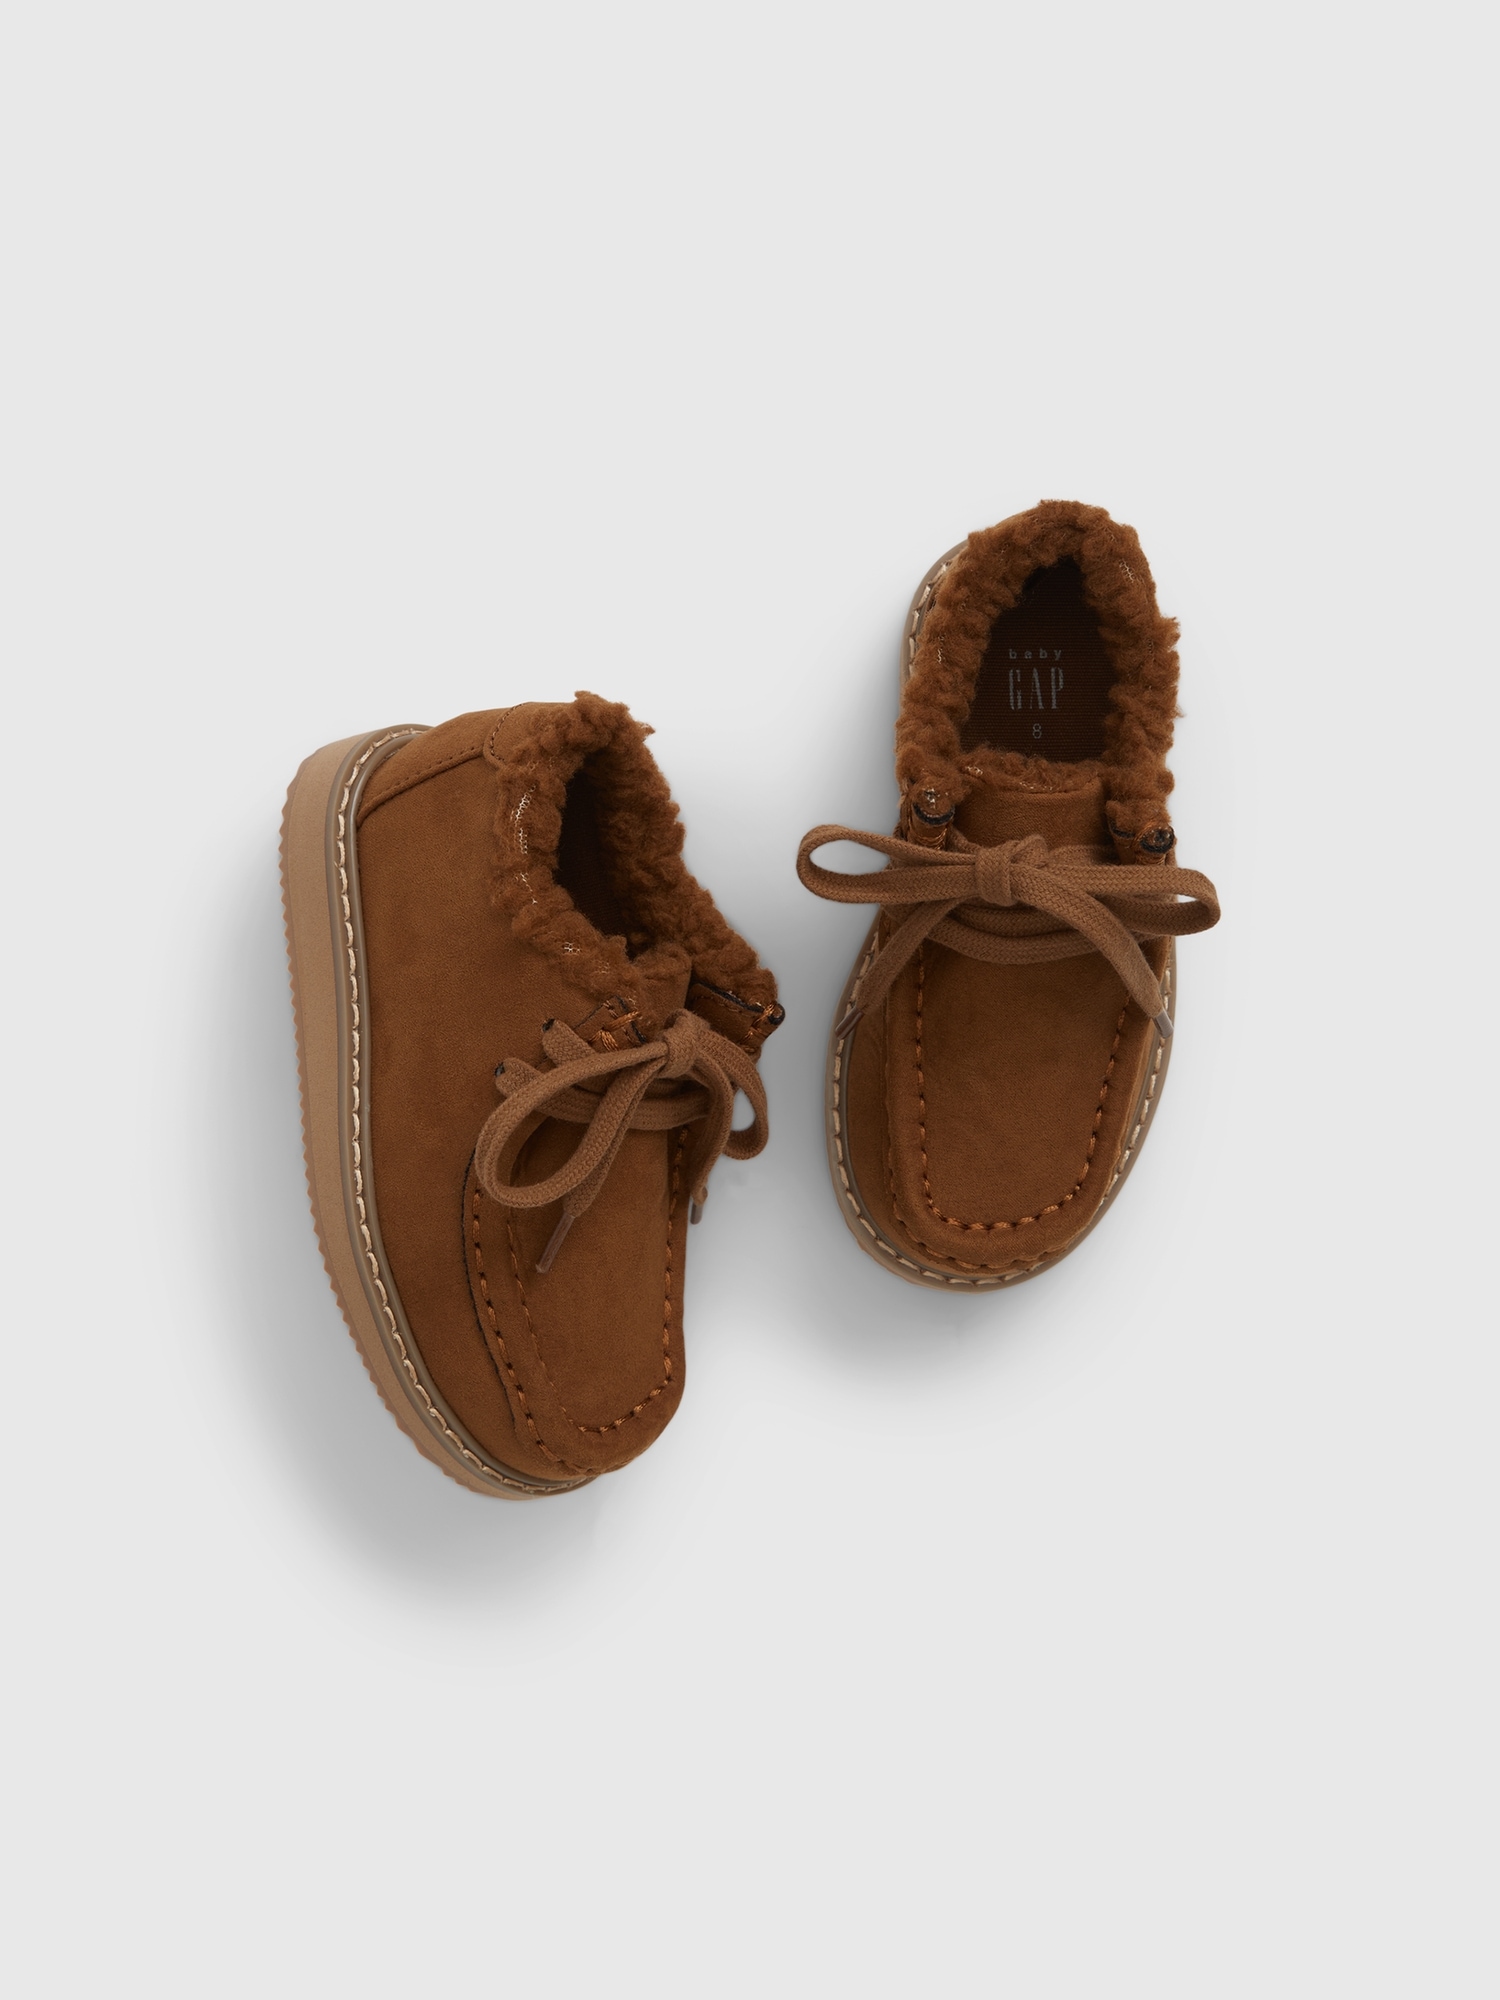 Toddler Sherpa Moc Boots